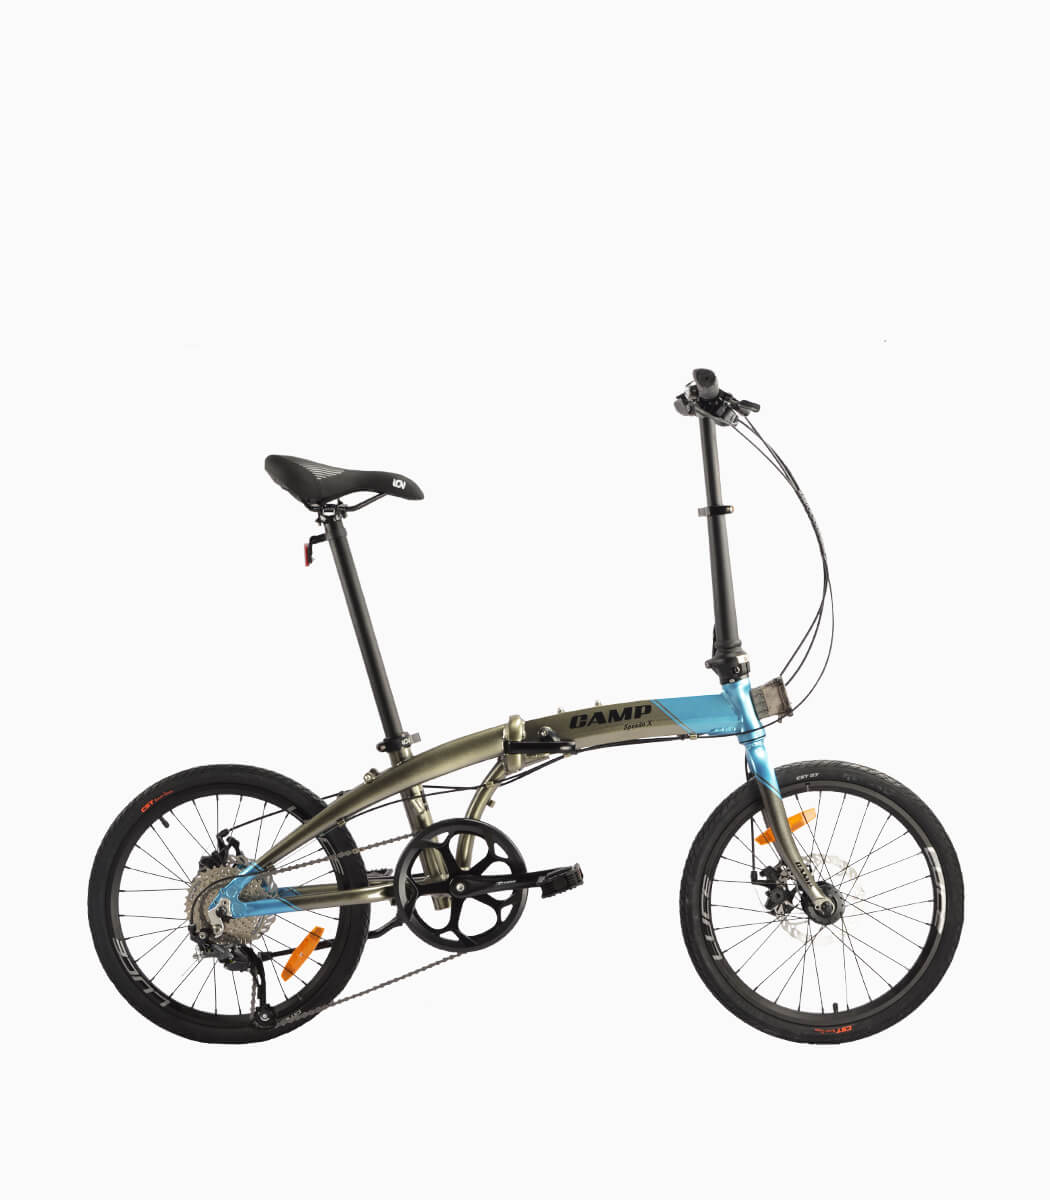 CAMP SPEEDO X (STONE-BLUE) foldable bicycle right